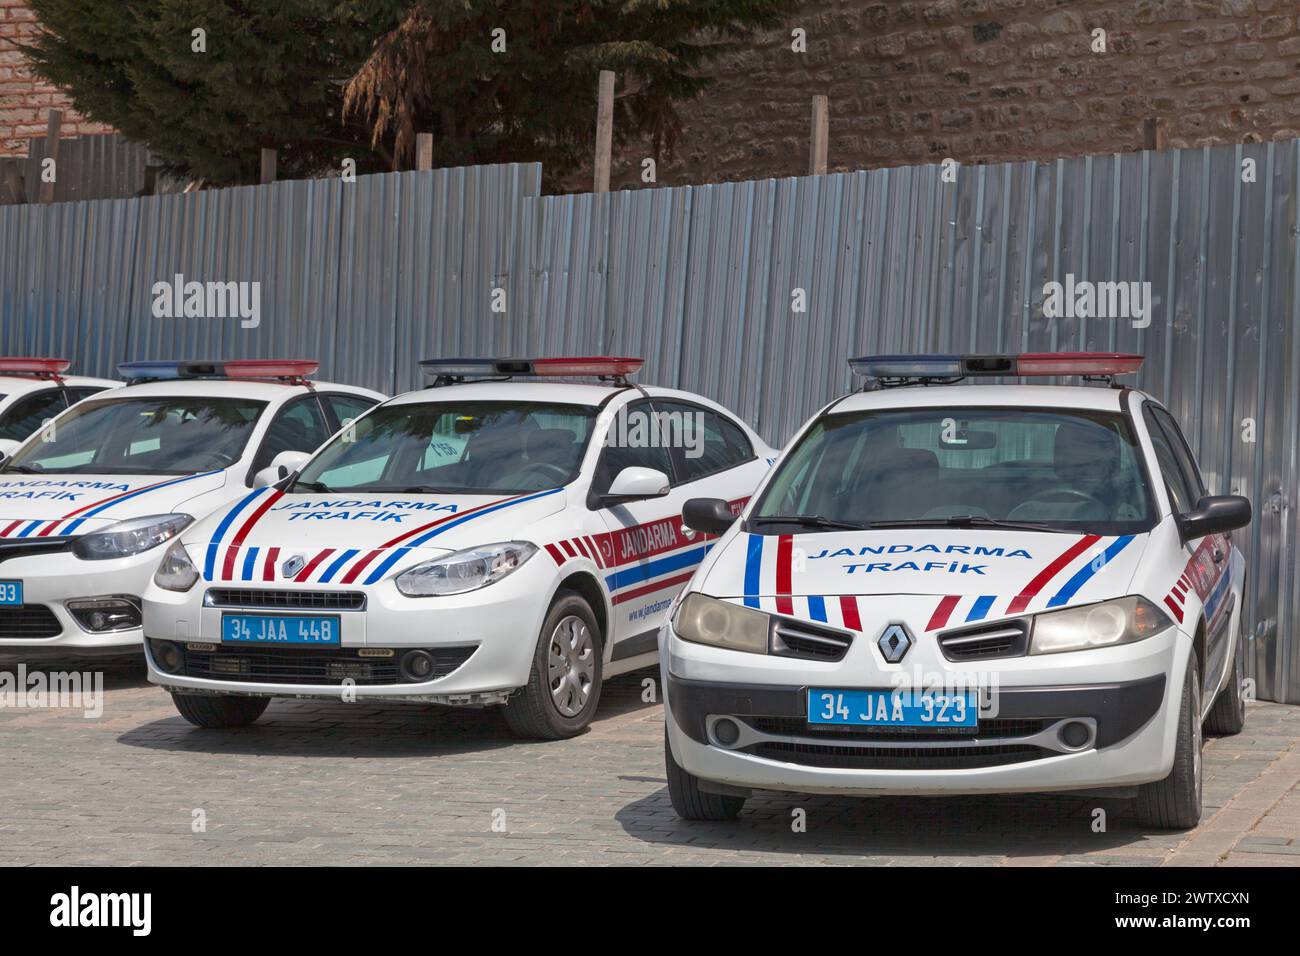 Istanbul, Turkey - May 09 2019: Row of cars from the Trafik jandarma (Traffic Gendarmerie) parked in a street. Stock Photo